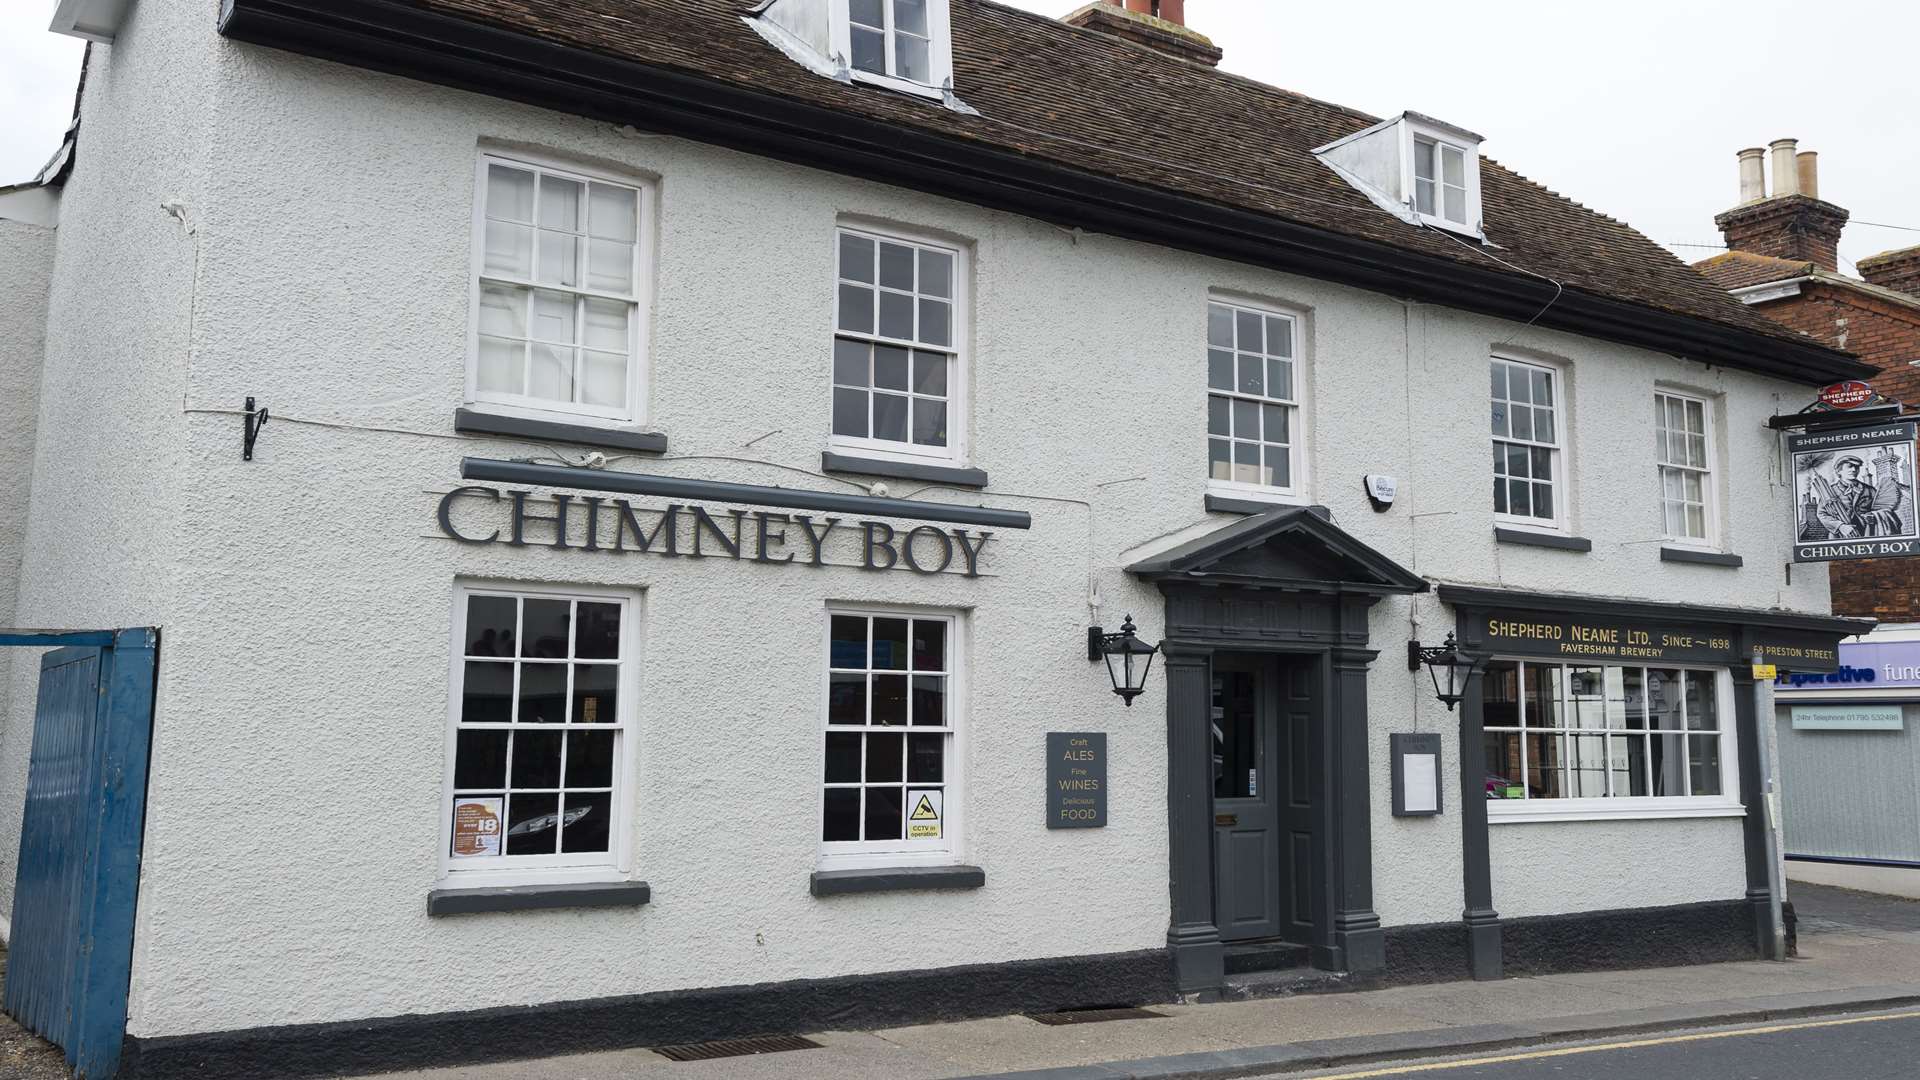 The Chimney Boy in Preston Street will become the Limes.